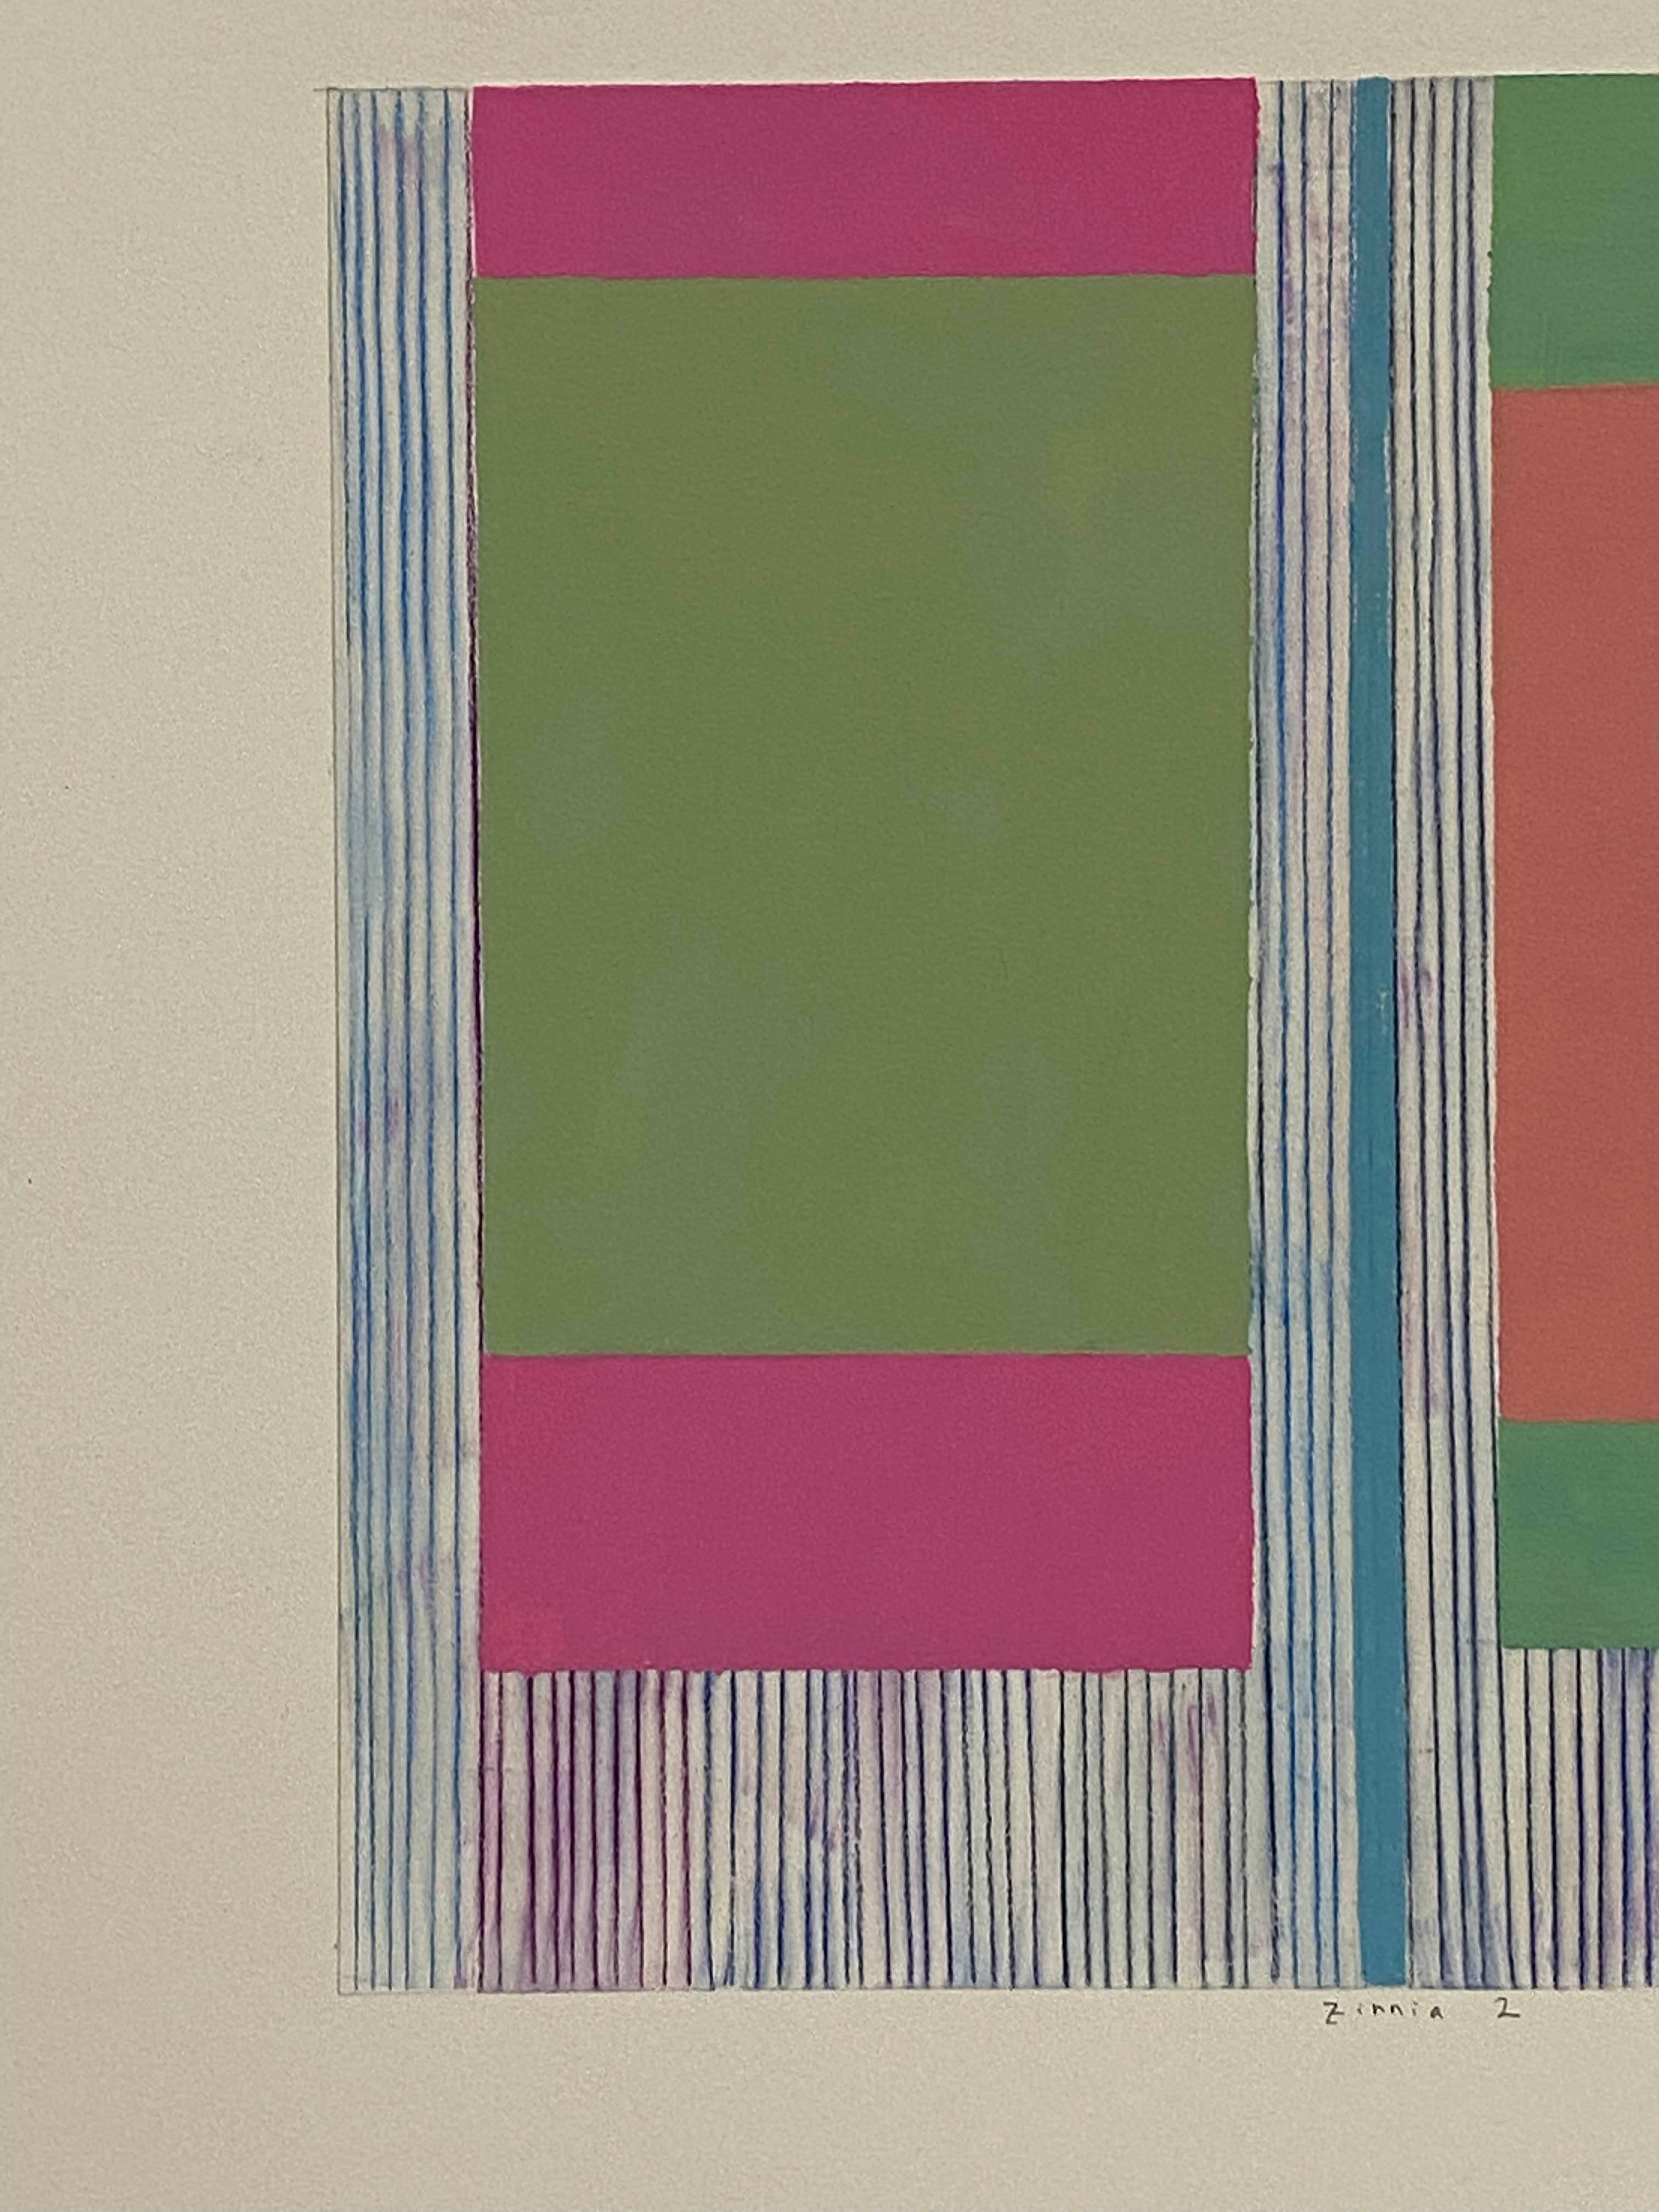 In this painting on paper by Elizabeth Gourlay, clean and precise, carefully ordered blocks of color in shades of hot pink, coral, light green and blue and thin lines in dark blue and violet are bright and luminous against the neutral off-white